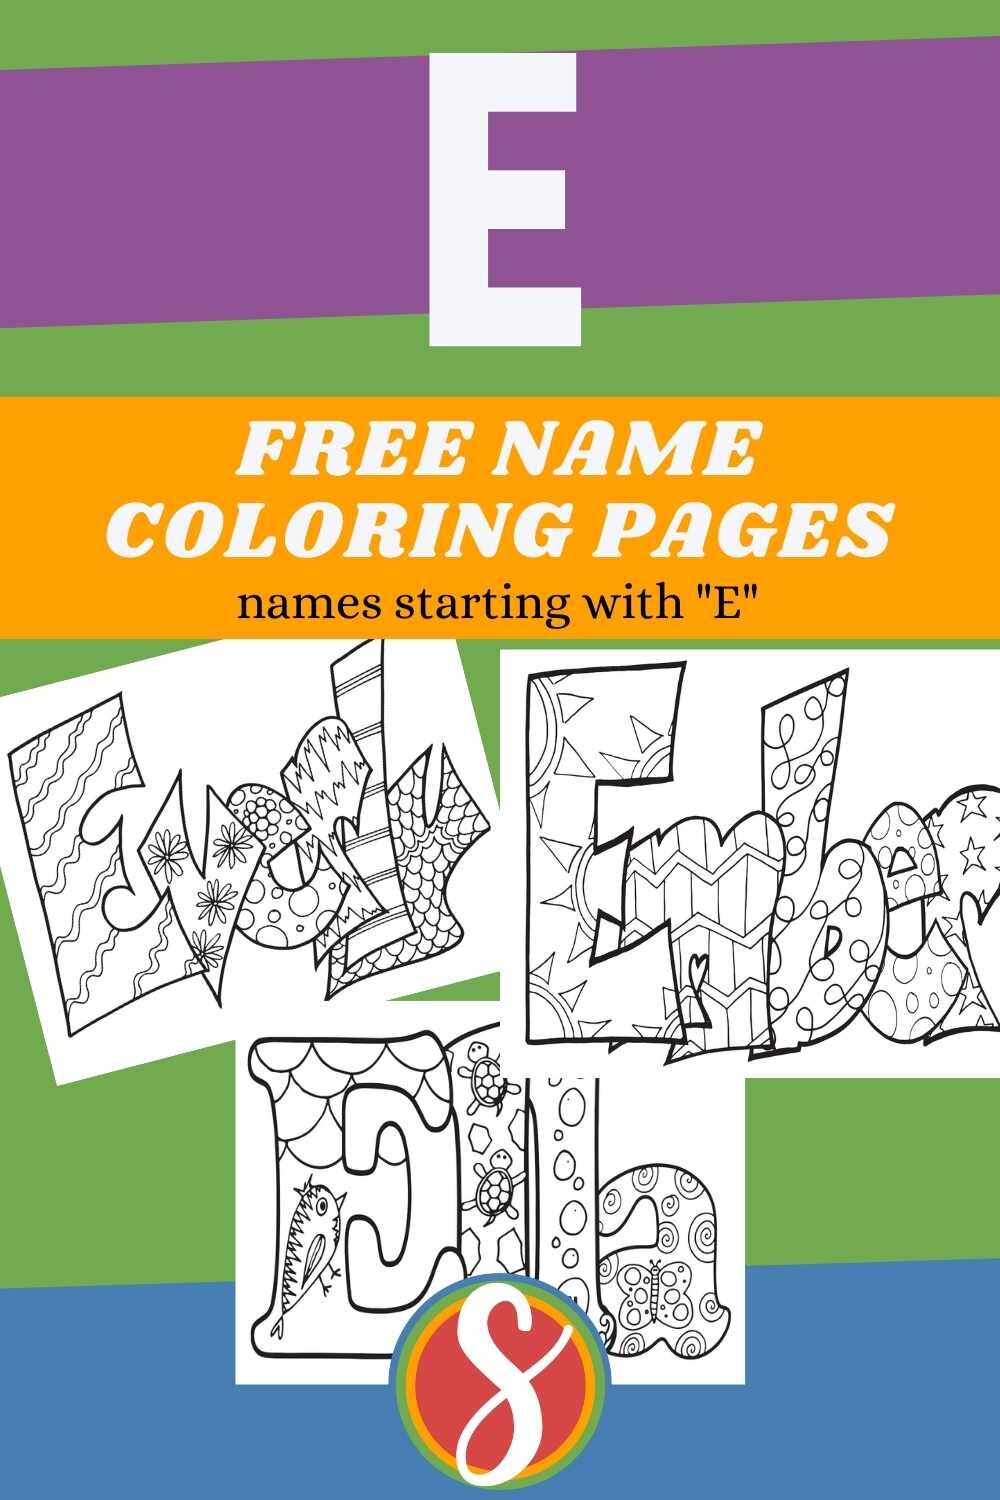 free name coloring pages starts with e.jpg